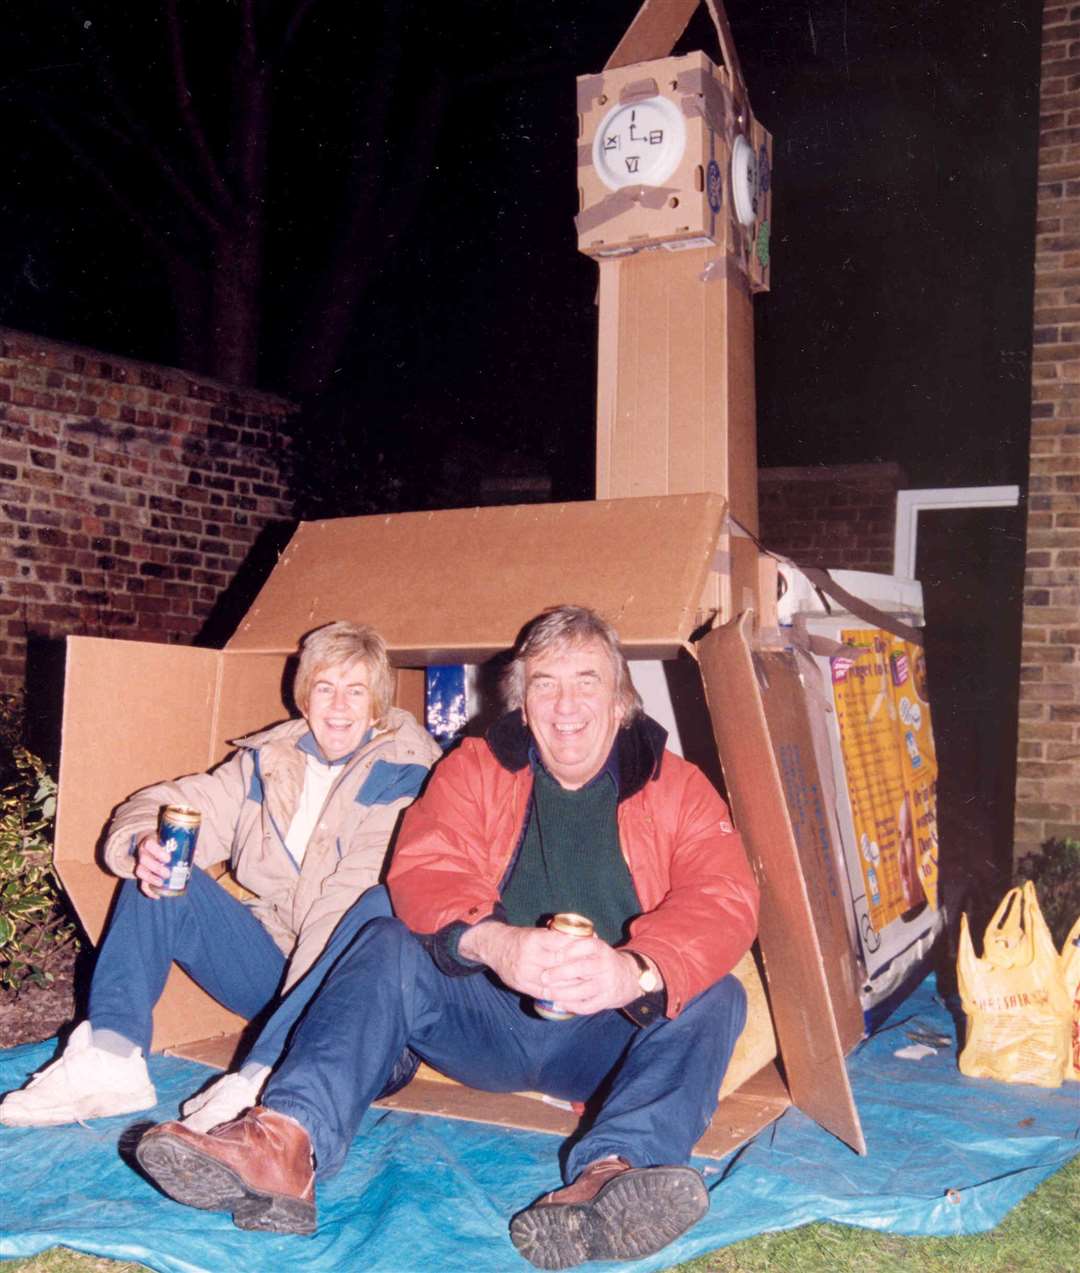 Bob Marshall-Andrews, MP for Medway, and his wife slept in a box made in the shape of the Houses of Parliament in 1998